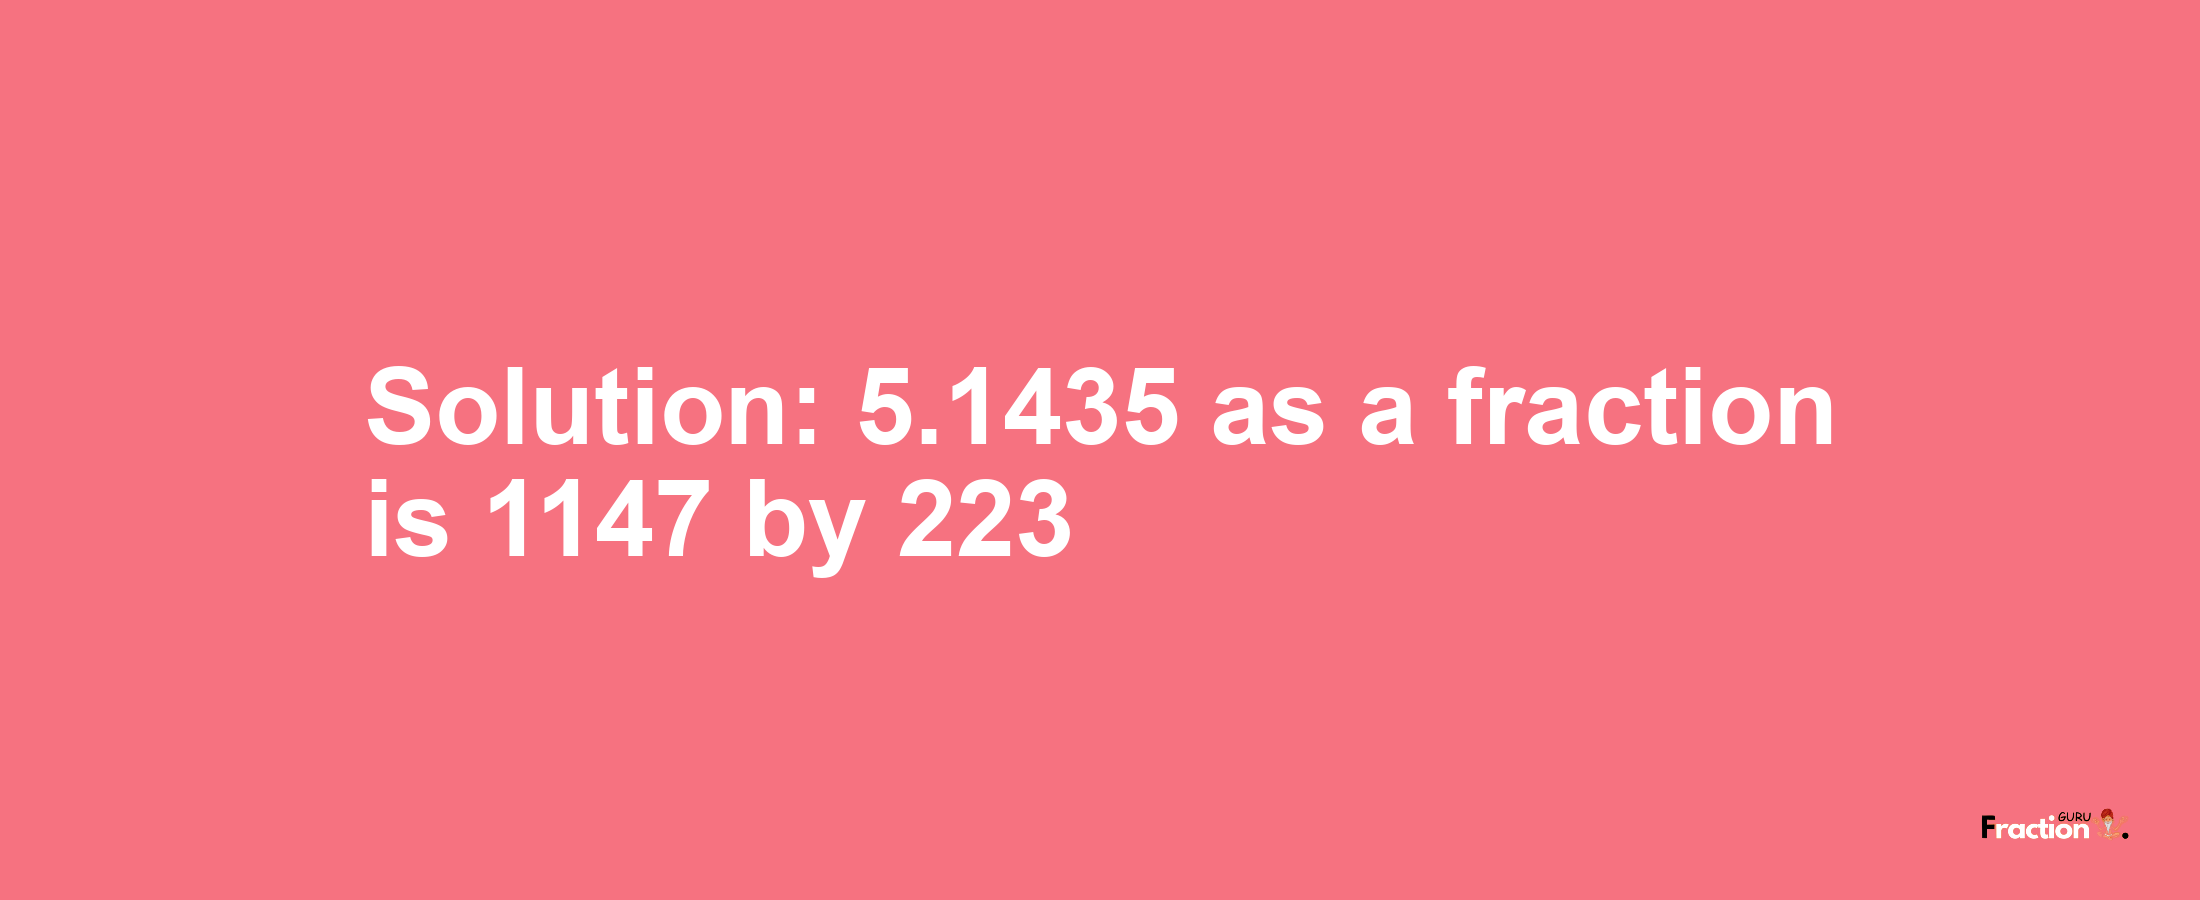 Solution:5.1435 as a fraction is 1147/223